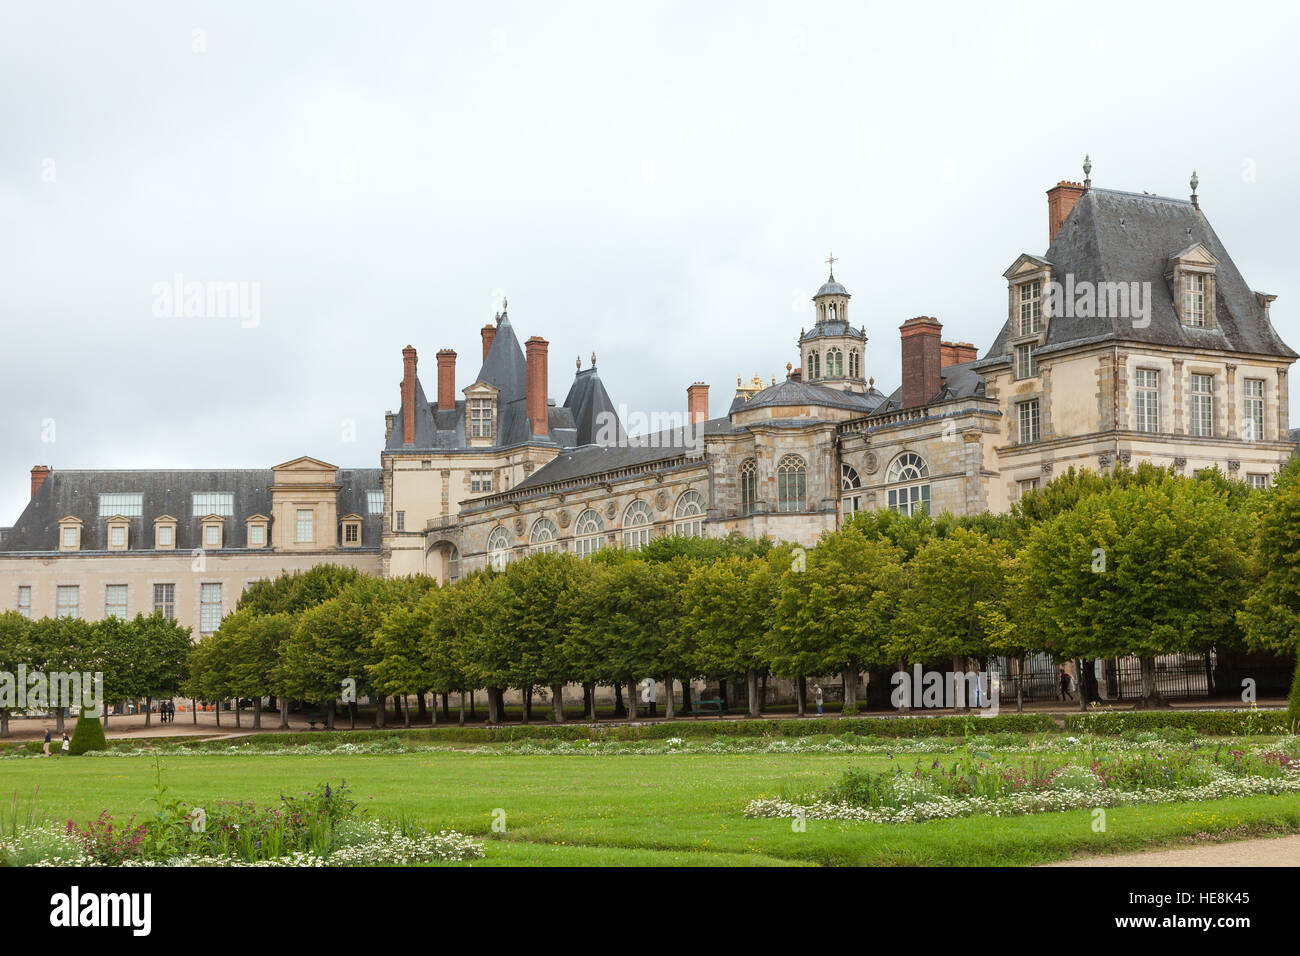 FONTAINEBLEAU, FRANCE - JULY 13, : Royal hunting castle Fontainbleau, France, July 13,2014. Stock Photo